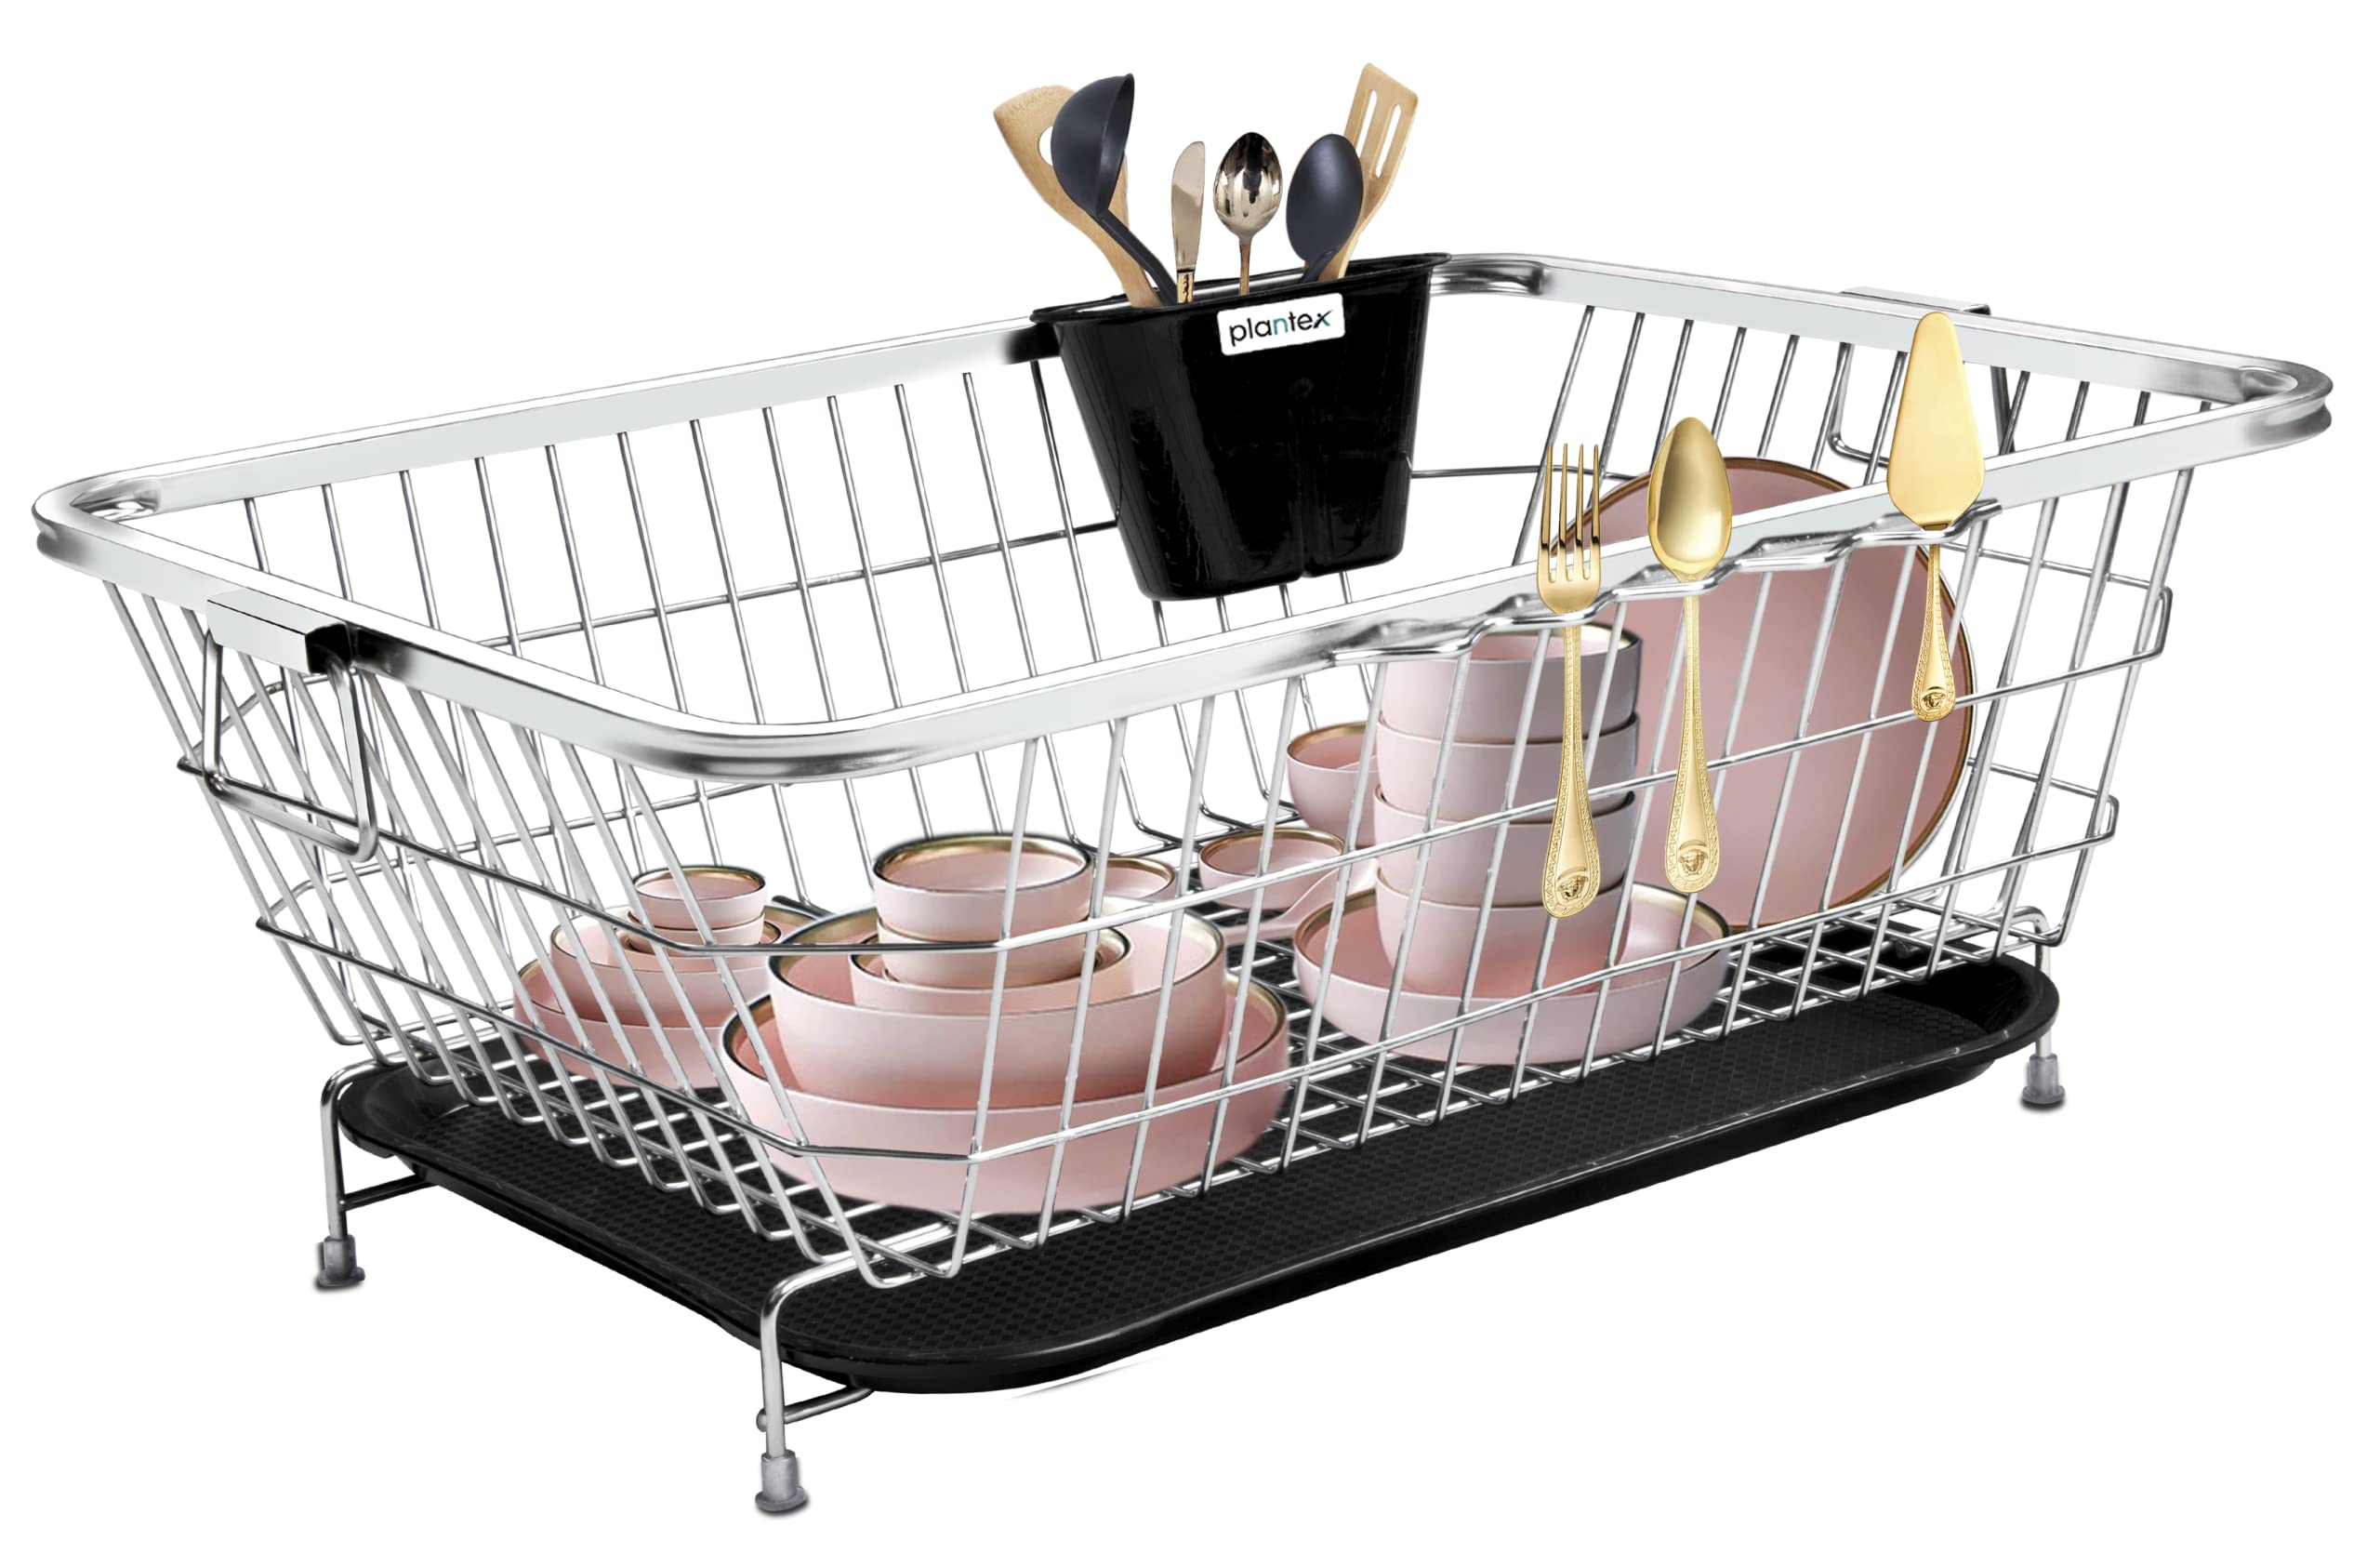 Plantex Stainless Steel Dish Drainer Basket for Kitchen Utensils/Dish Drying Rack with Drainer/Plate Stand/Bartan Basket (Size-56 x 43 x 22 cm)